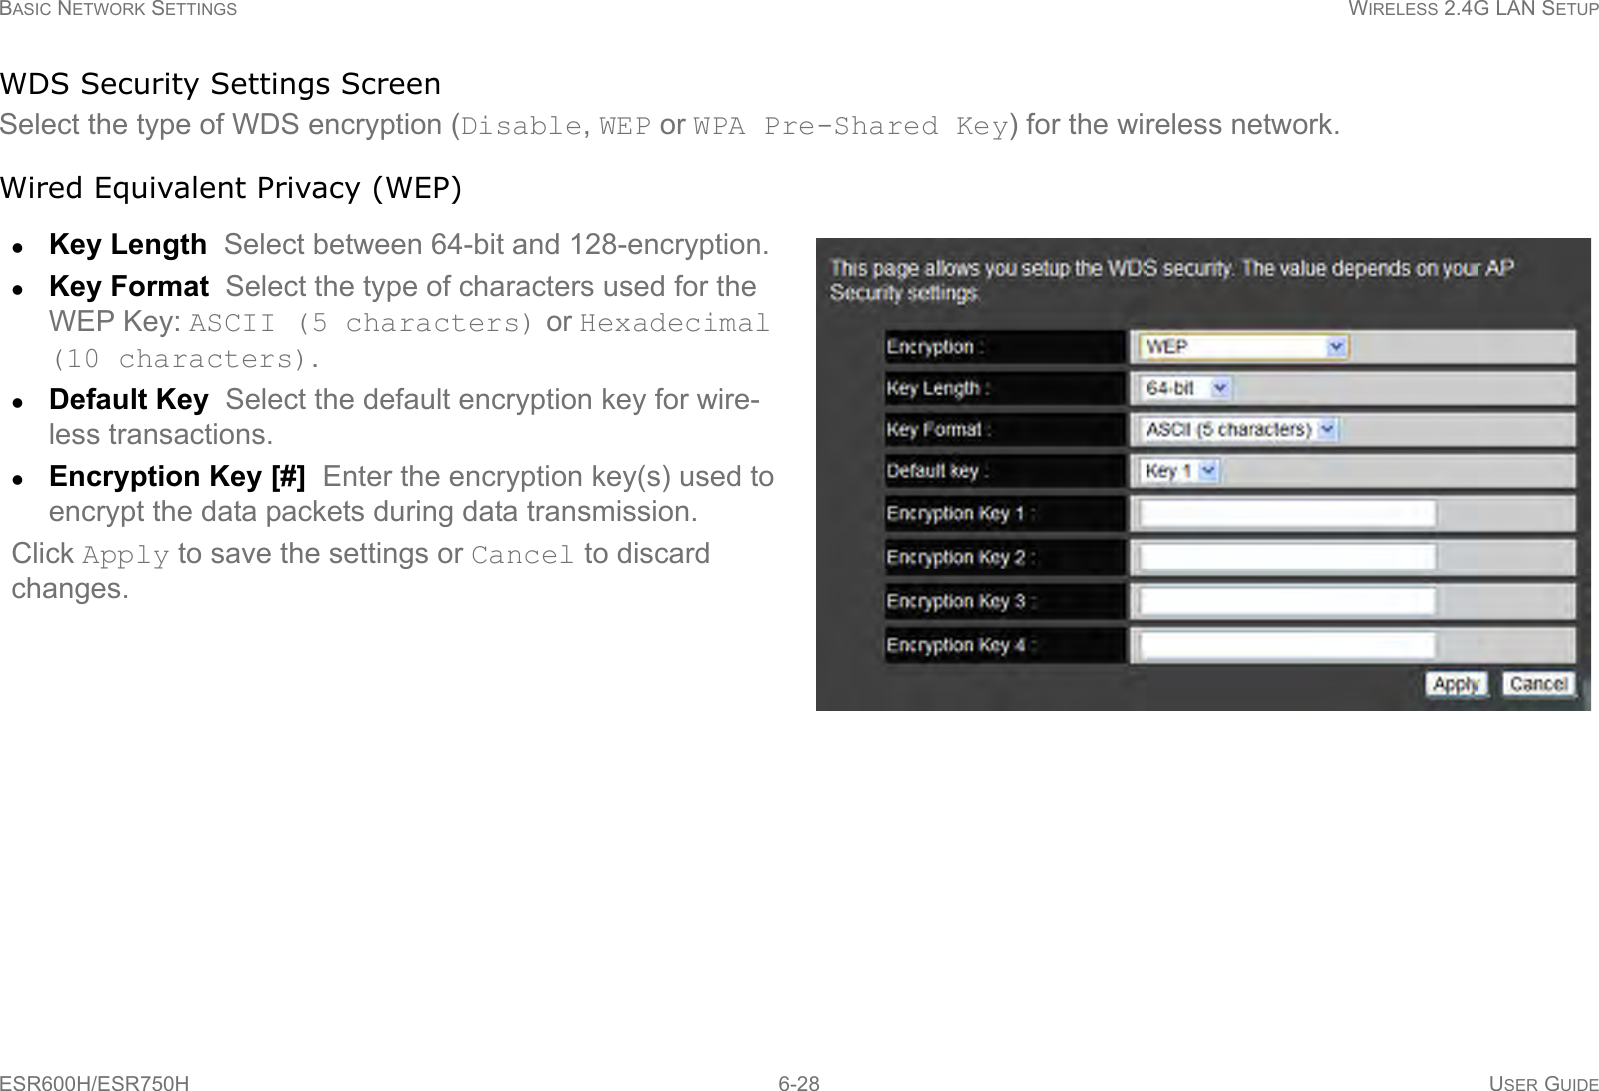 BASIC NETWORK SETTINGS WIRELESS 2.4G LAN SETUPESR600H/ESR750H 6-28 USER GUIDEWDS Security Settings ScreenSelect the type of WDS encryption (Disable, WEP or WPA Pre-Shared Key) for the wireless network.Wired Equivalent Privacy (WEP)Key Length  Select between 64-bit and 128-encryption.Key Format  Select the type of characters used for the WEP Key: ASCII (5 characters) or Hexadecimal (10 characters).Default Key  Select the default encryption key for wire-less transactions.Encryption Key [#]  Enter the encryption key(s) used to encrypt the data packets during data transmission.Click Apply to save the settings or Cancel to discard changes.